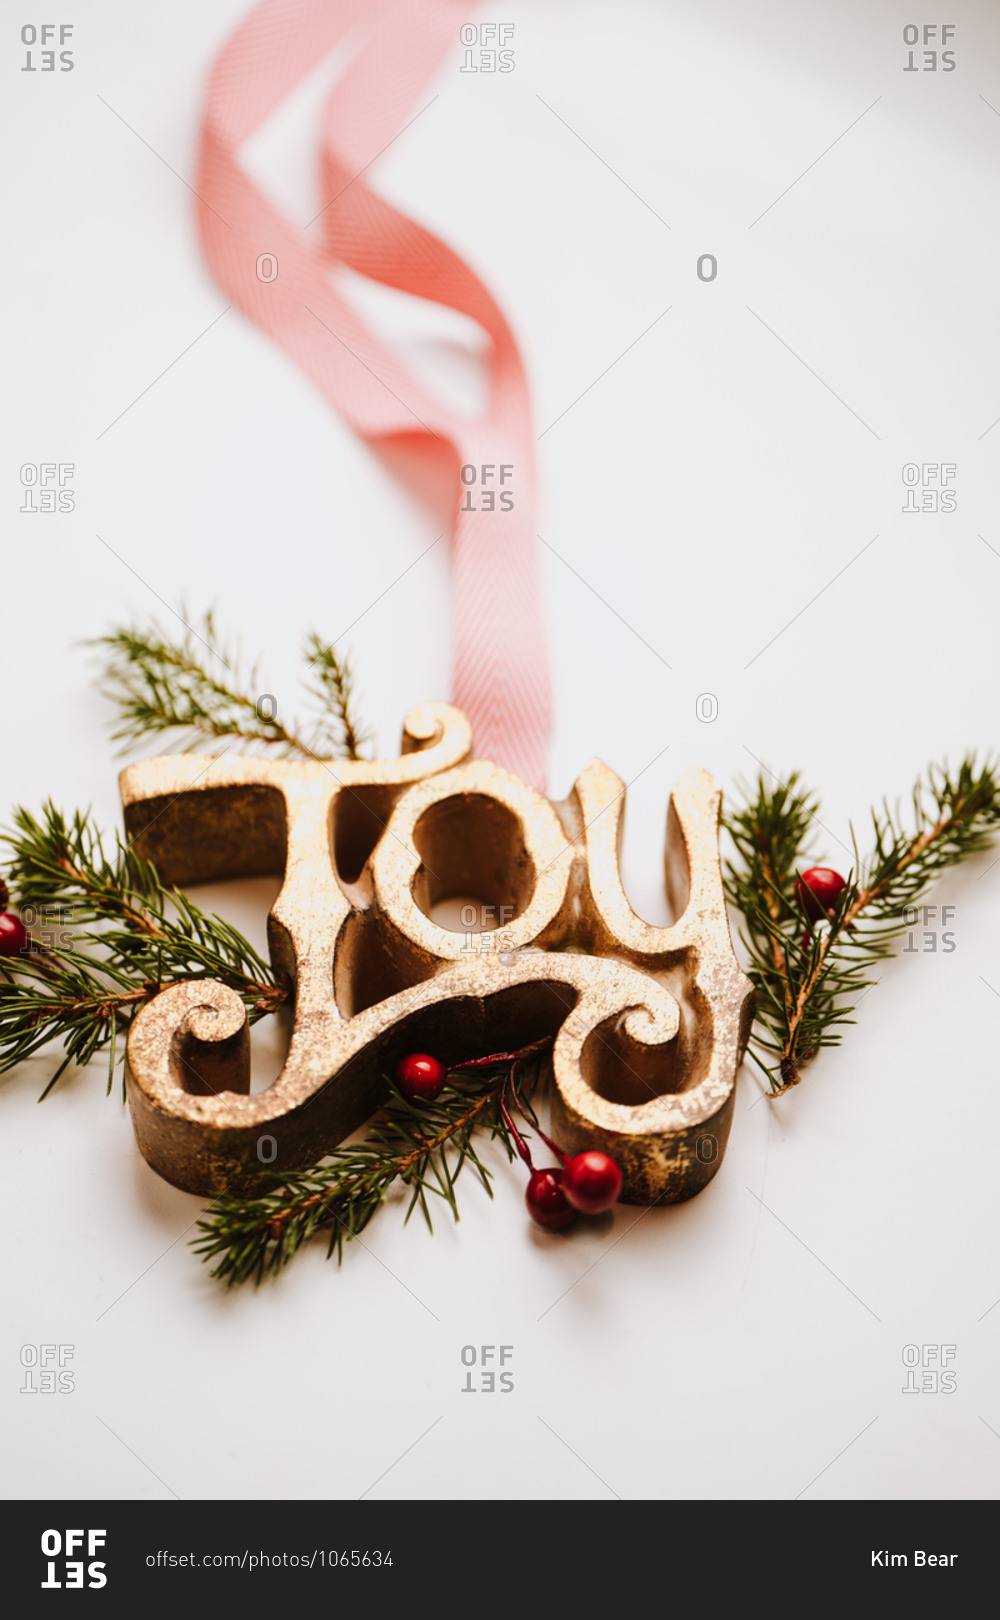 Close up of joy sign with ribbon on white background with pine branches and holly berries